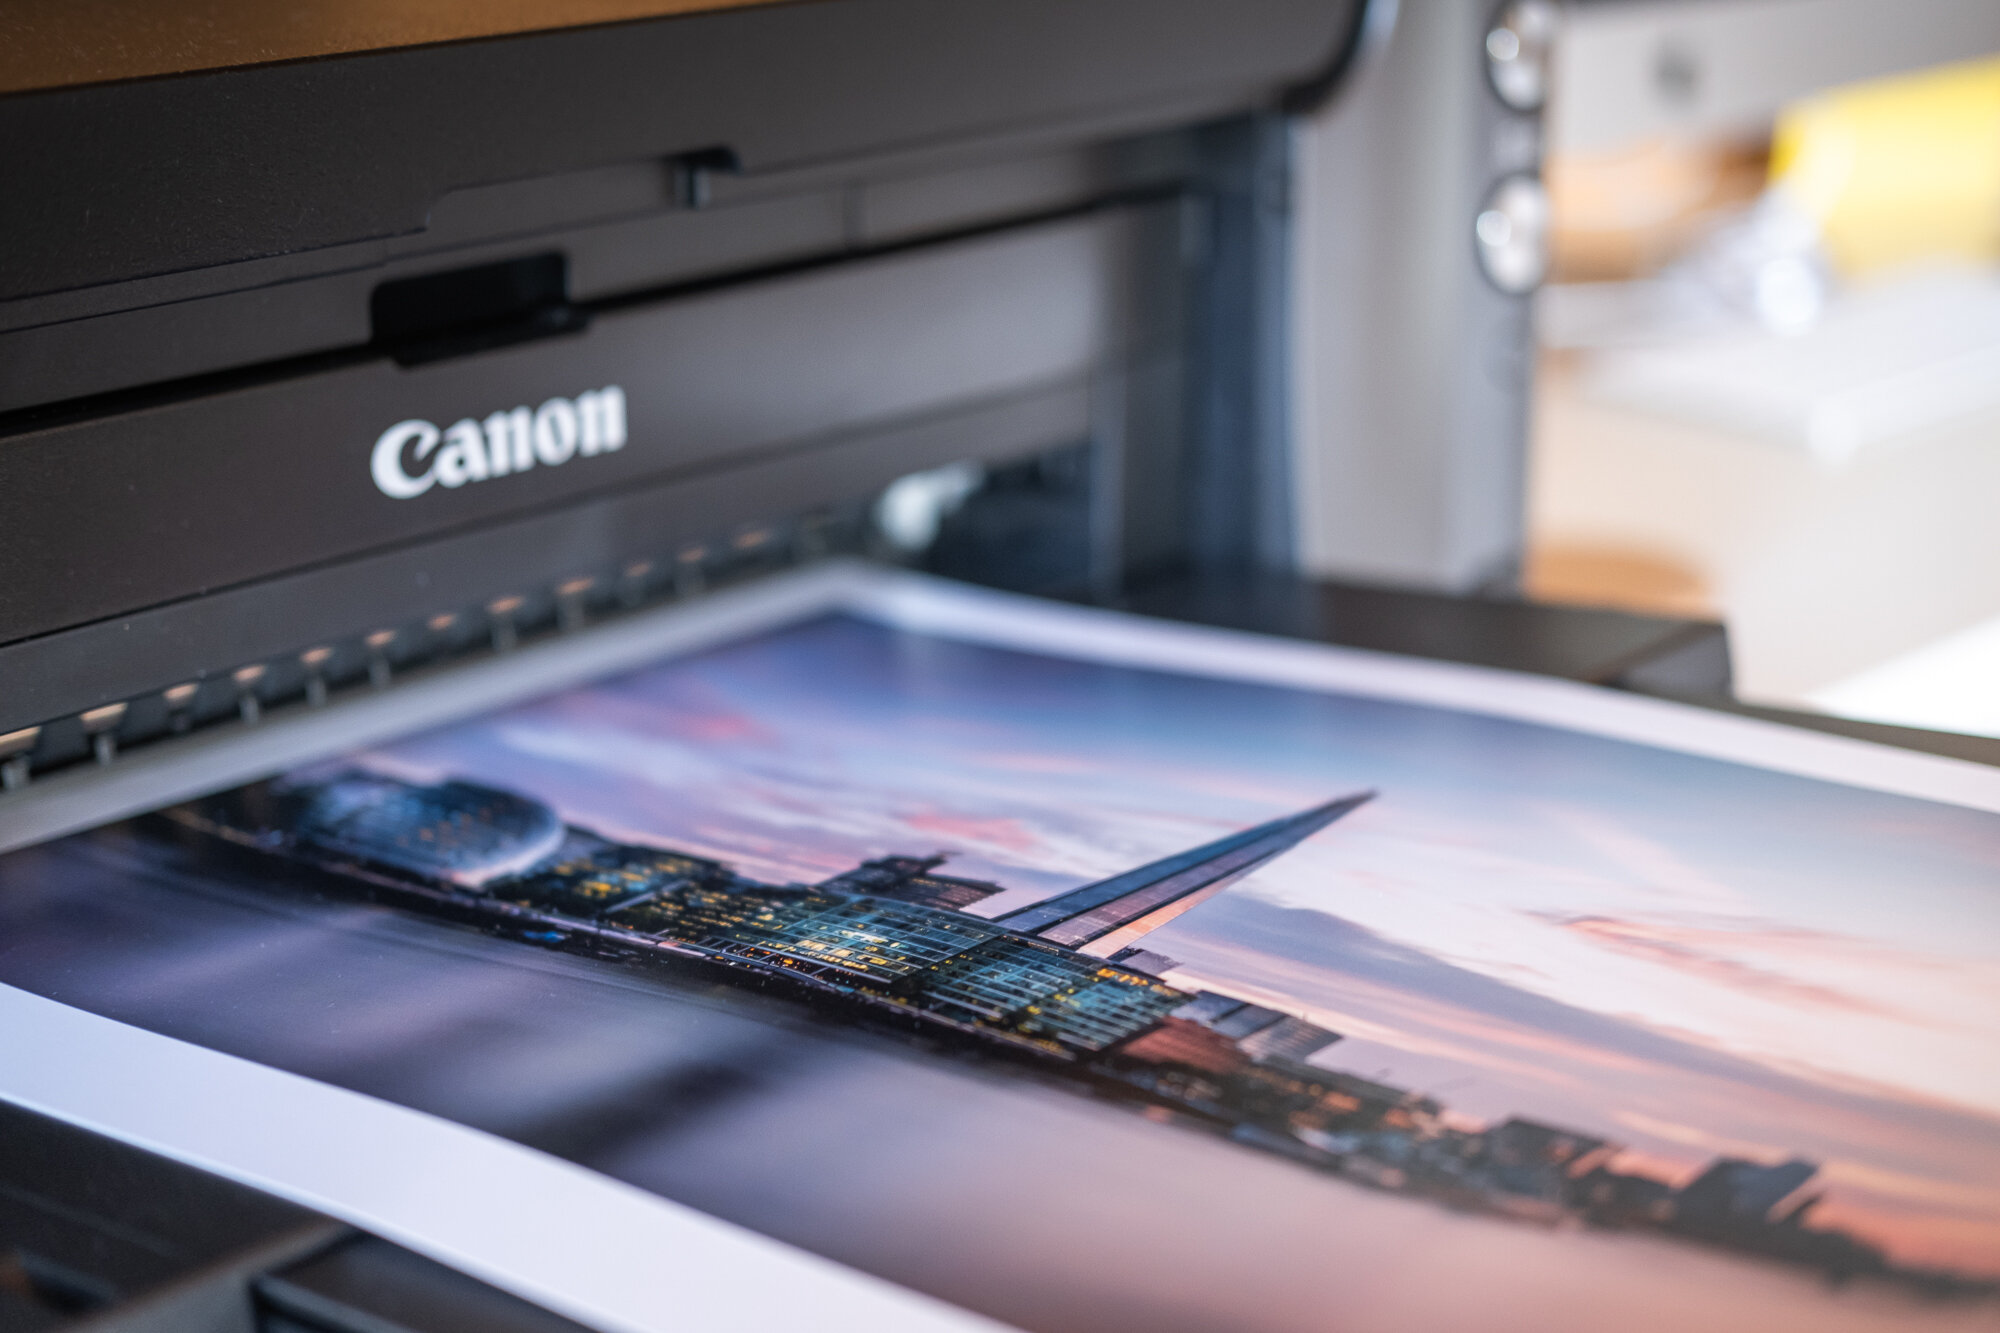 Printing my photo of The Shard at Sunset on the Canon PIXMA Pro10S